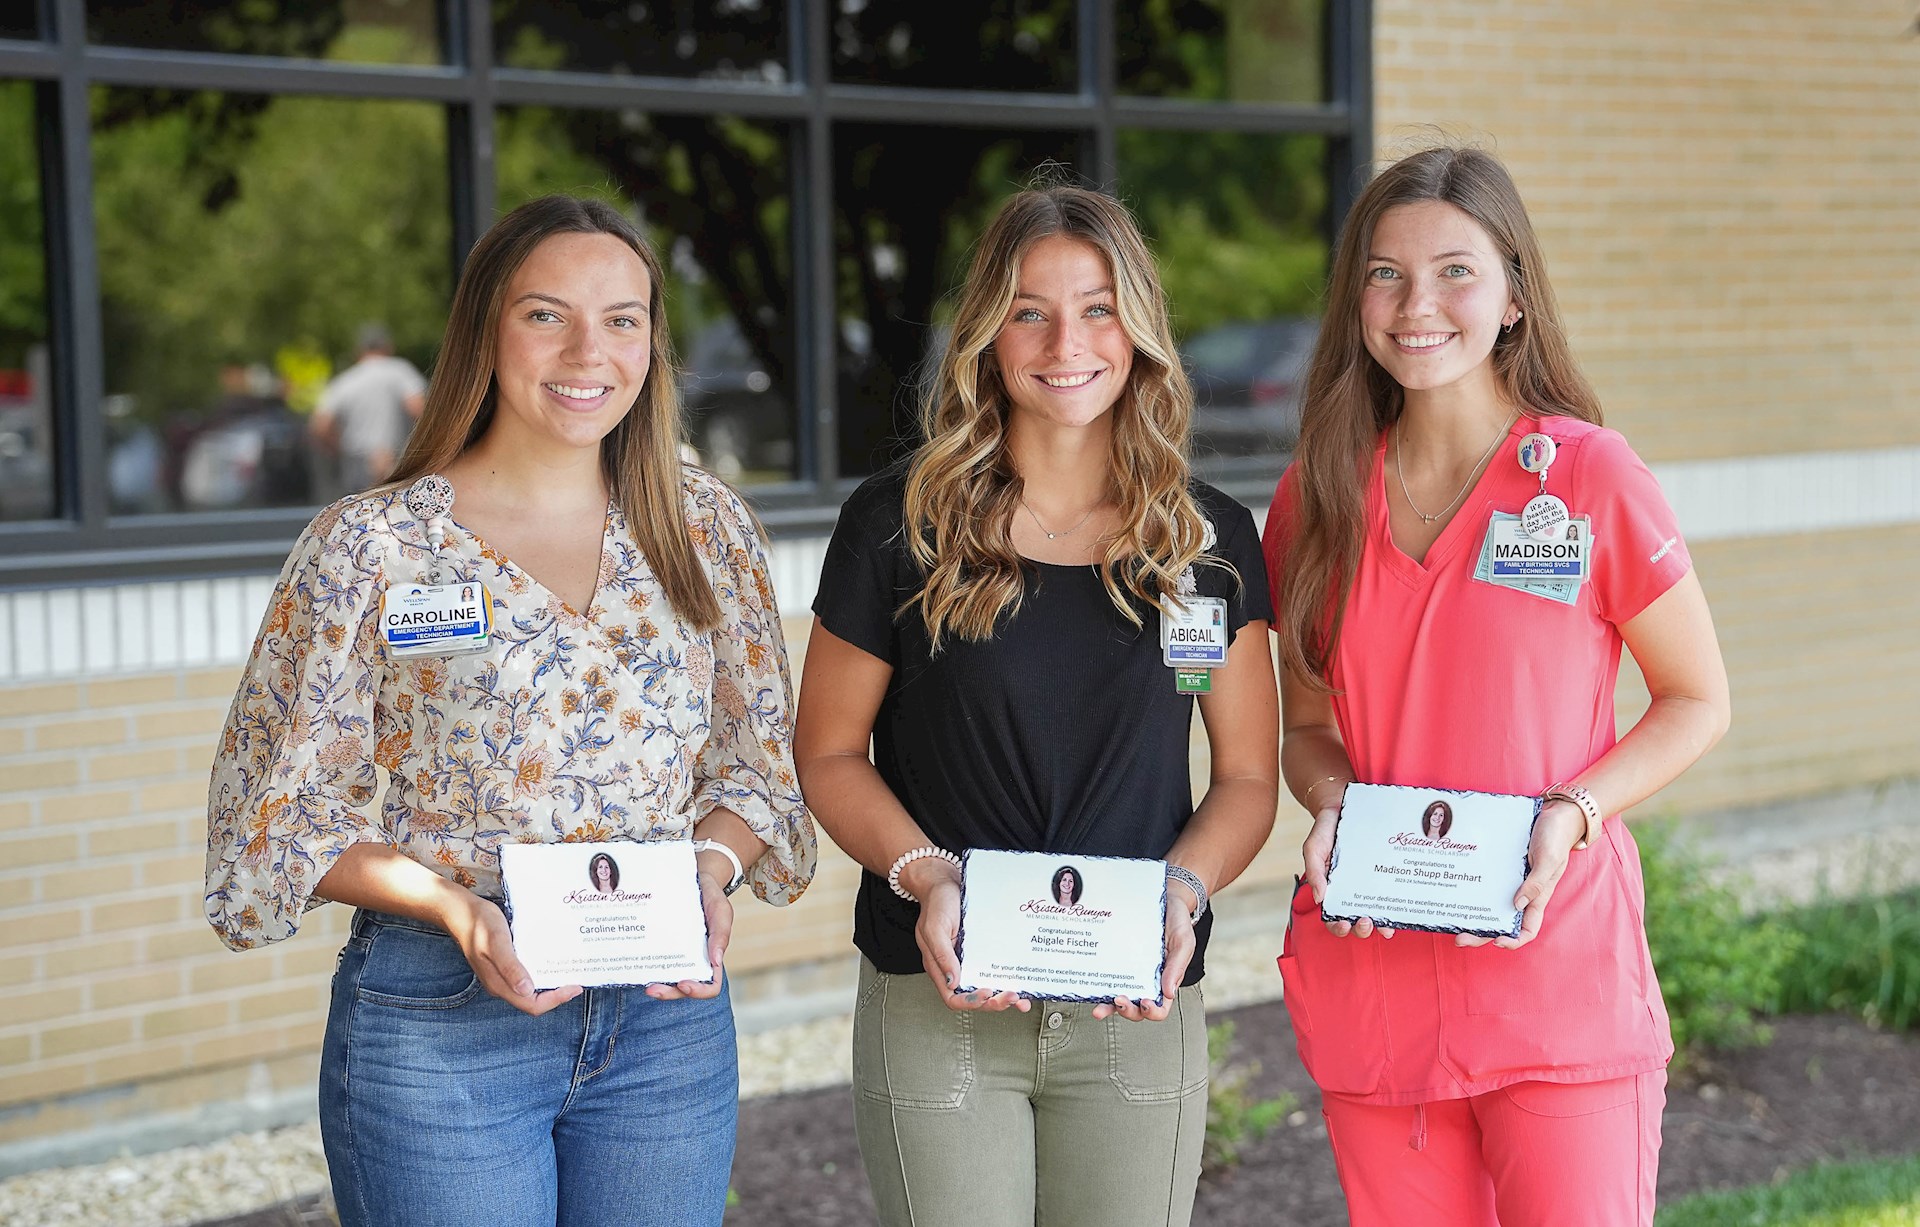 Caroline Hance (from left), Abigail Fischer, Madison Barnhart, and Sarah Goodman (not pictured) received  the Kristin Runyon Memorial Scholarship to support their nursing education.